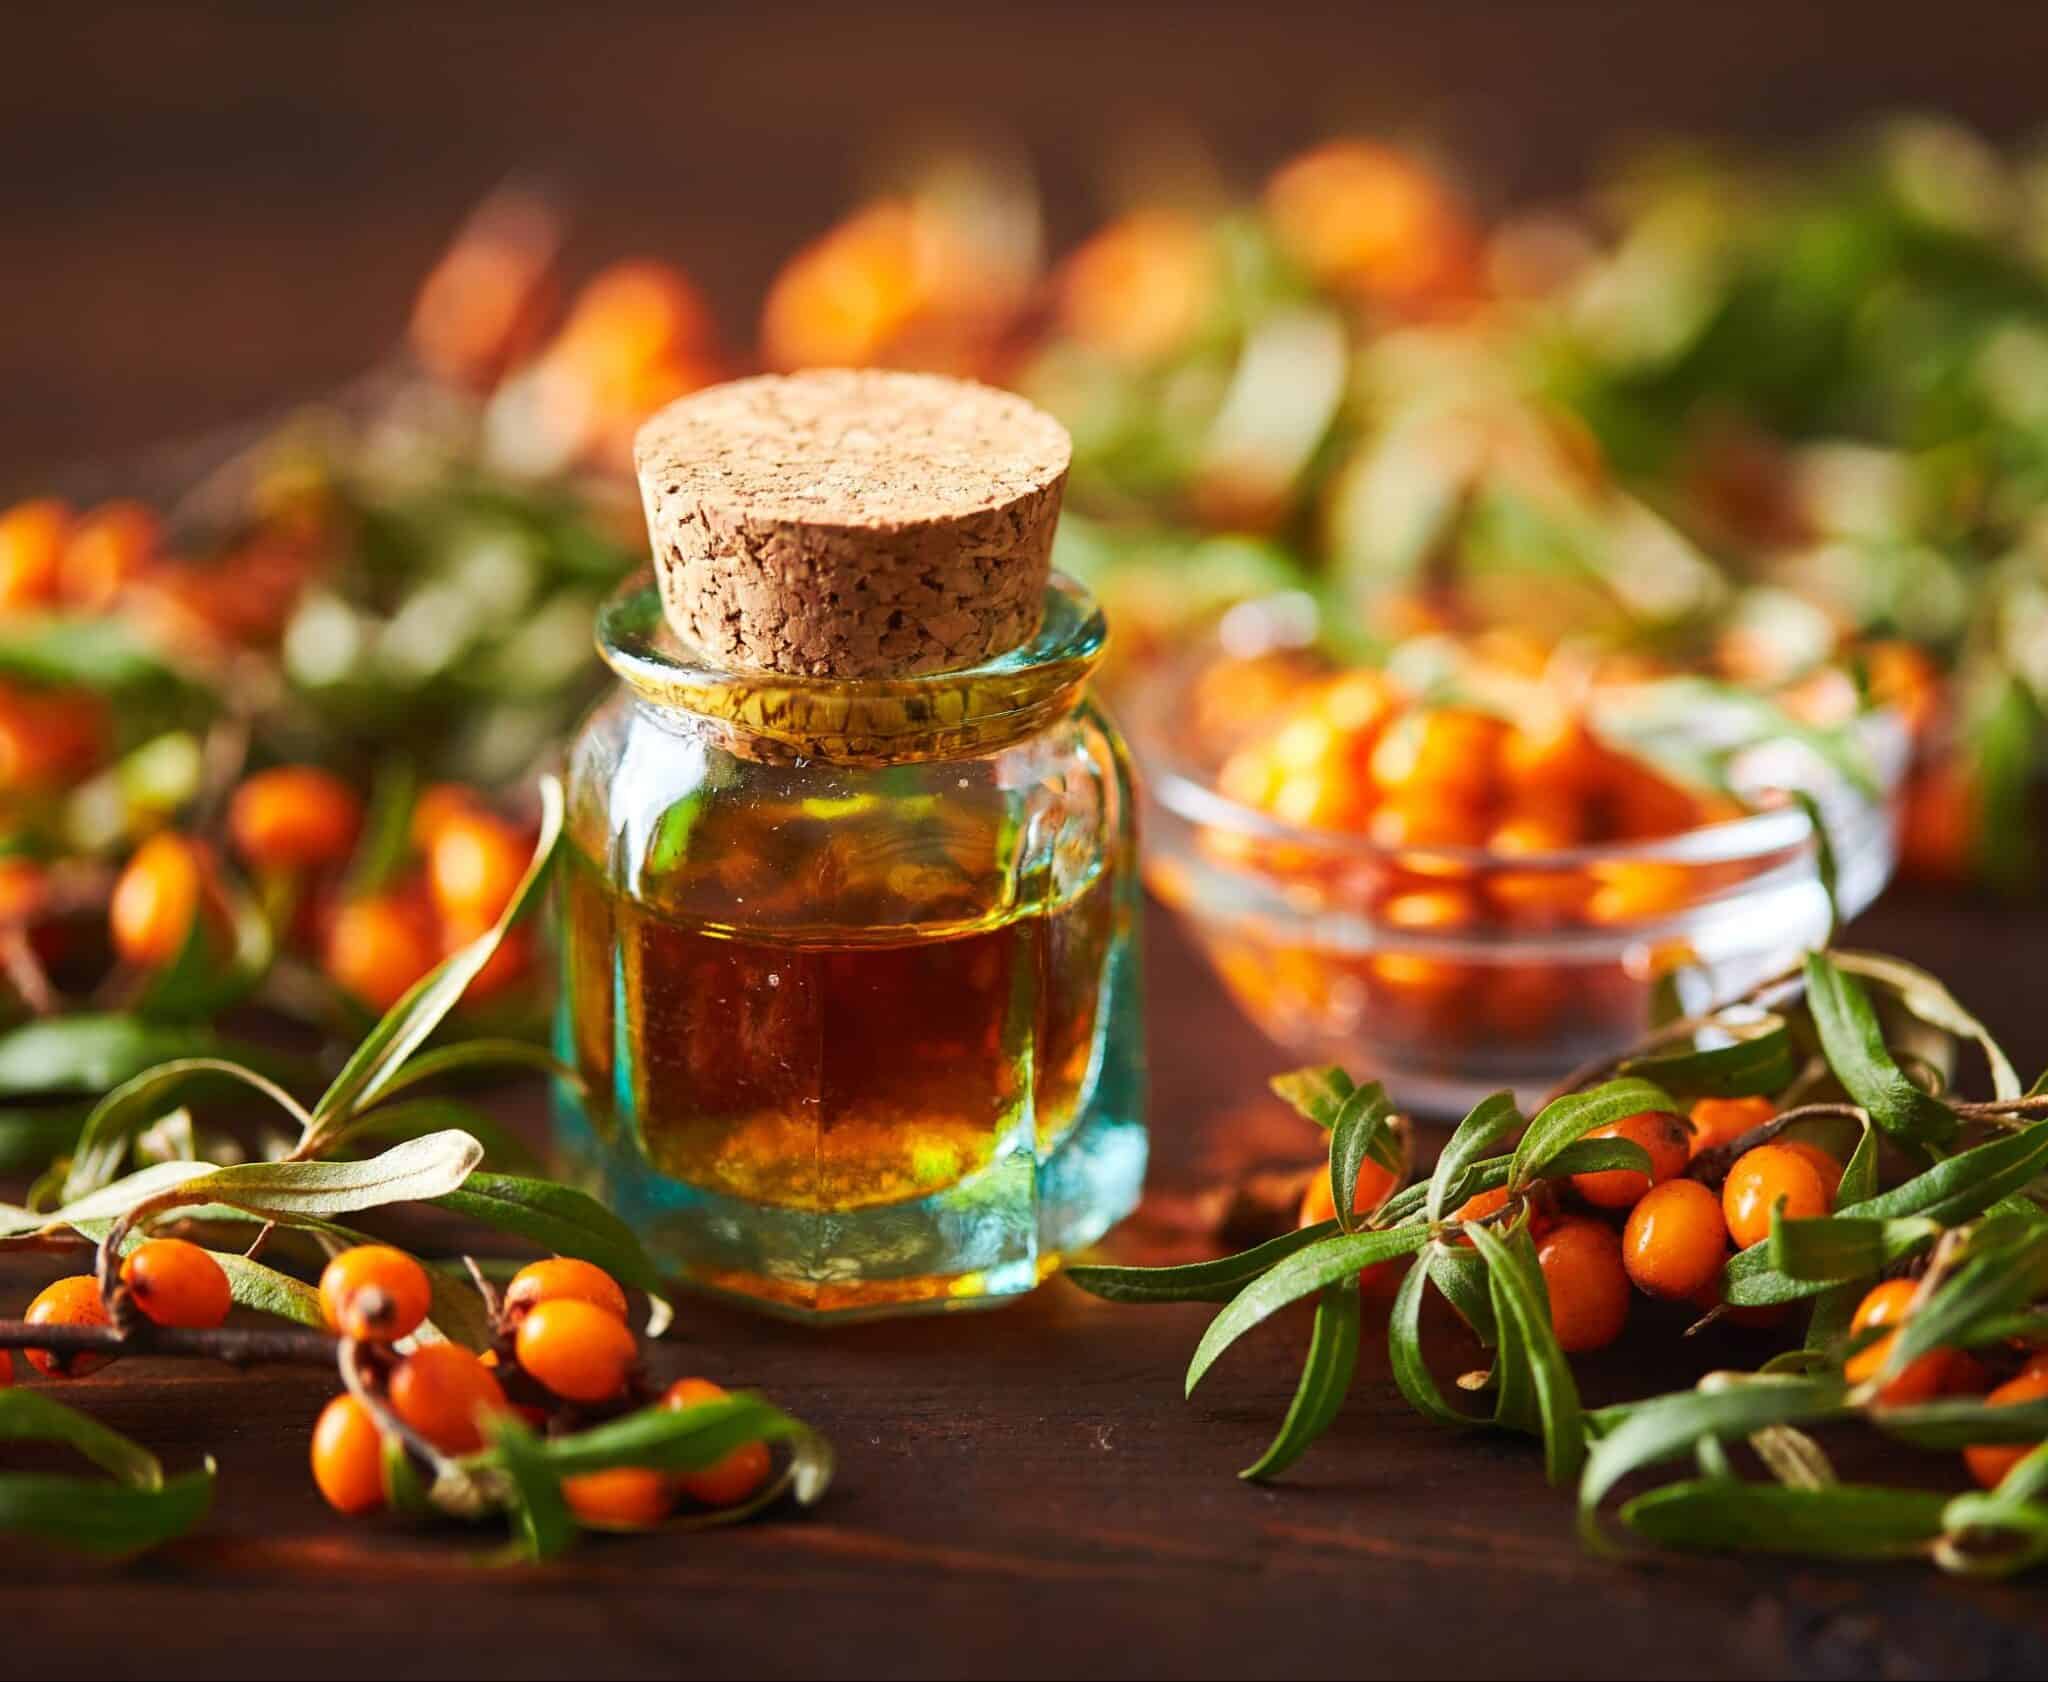 Glass bottle with sea buckthorn oil berries and sea buckthorn branches on wooden background.